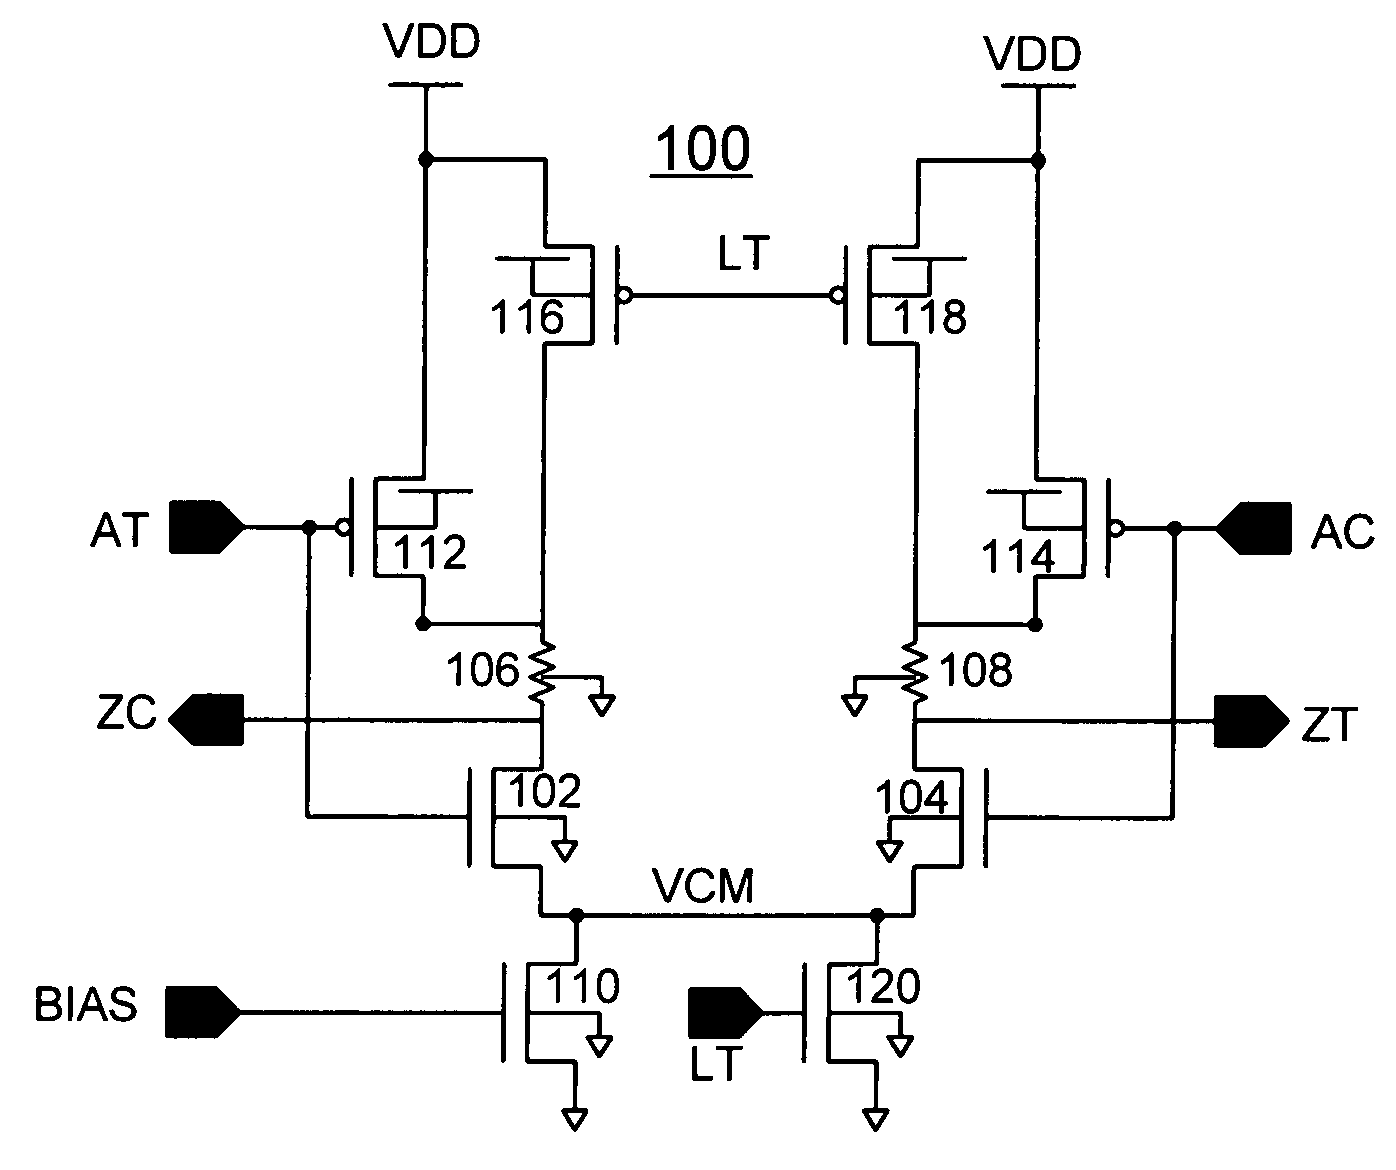 Dual mode analog differential and CMOS logic circuit